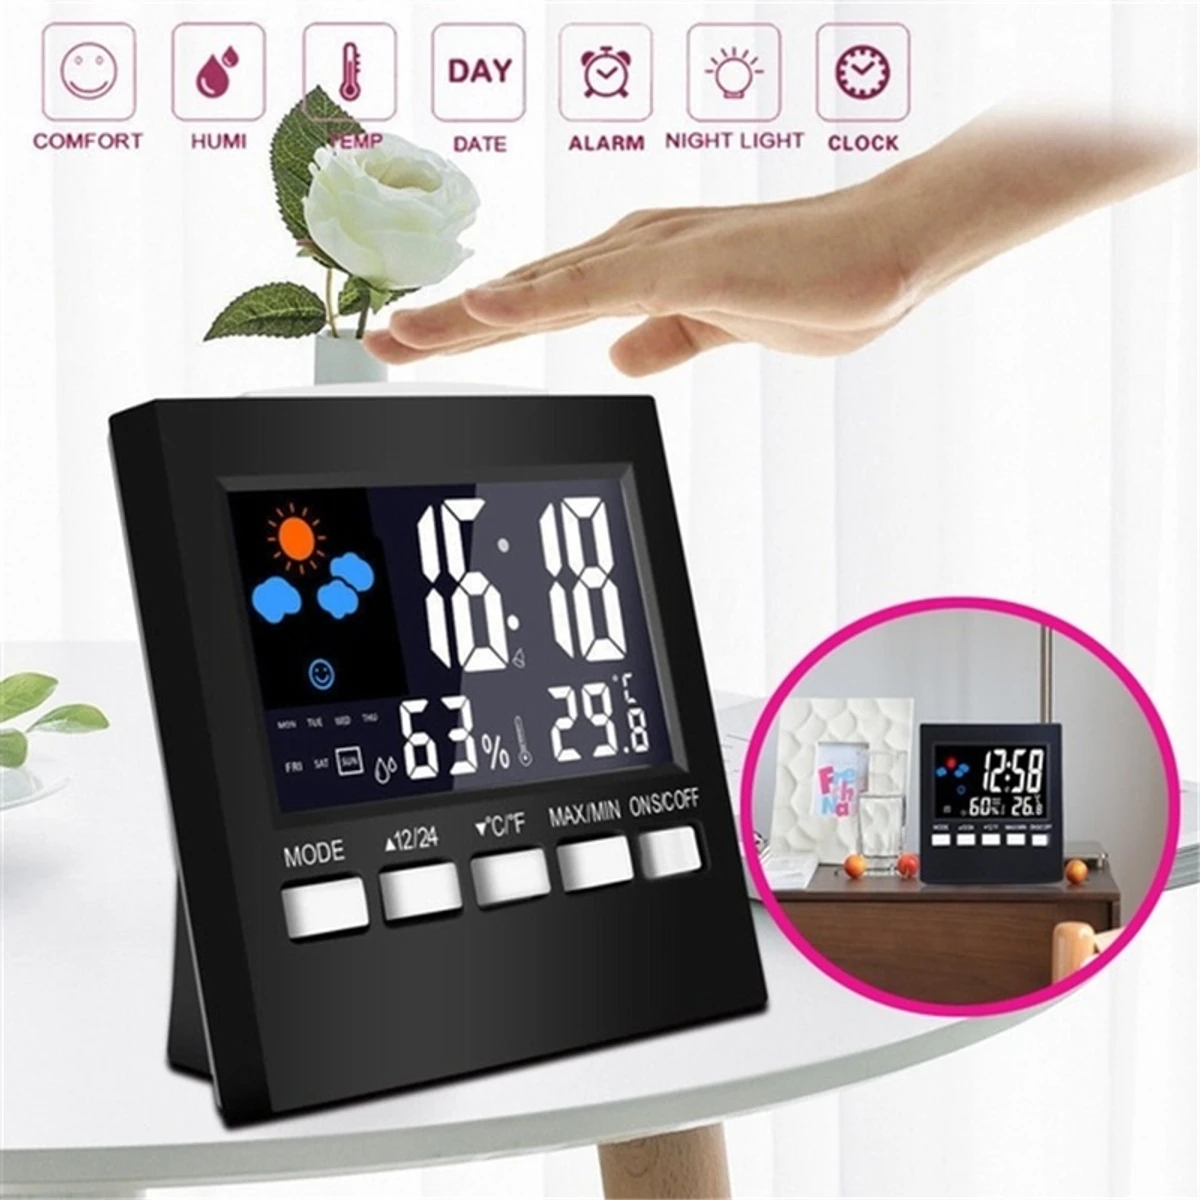 Weather Clock Color Screen New Digital Display Thermometer Humidity Clock Colorful LCD Alarm Calendar Weather Pop